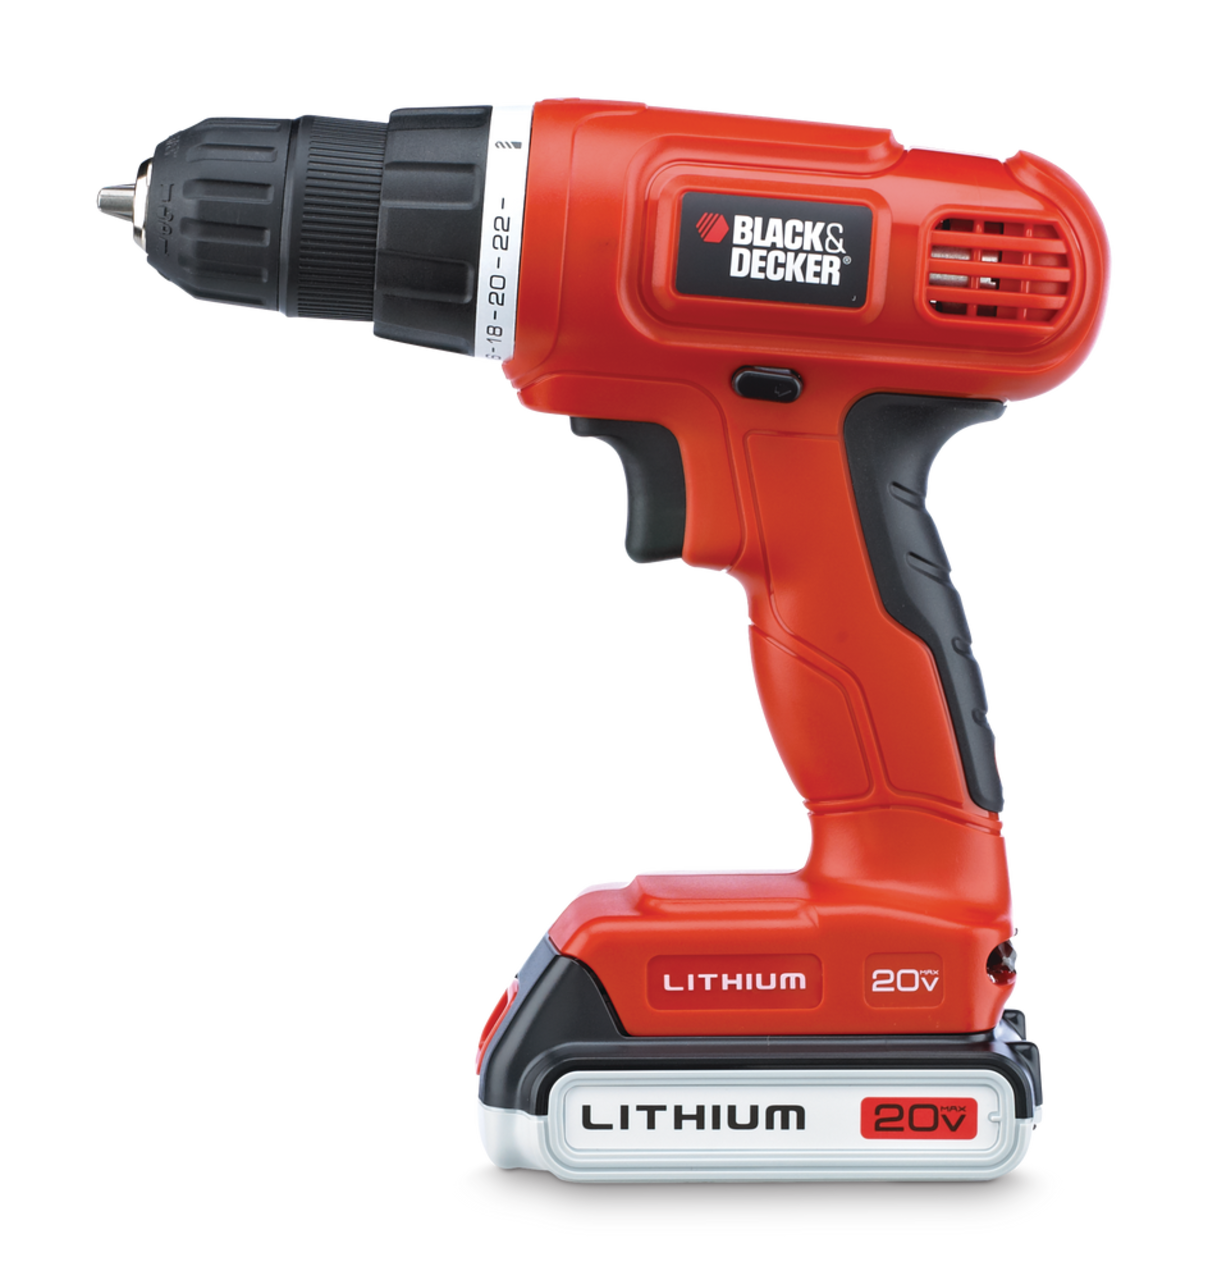 https://media-www.canadiantire.ca/product/fixing/tools/portable-power-tools/0543199/b-d-20v-li-ion-drill-with-100pc-accessory-case-8eba0e94-945e-4d70-9050-078e60a0597f.png?imdensity=1&imwidth=1244&impolicy=mZoom